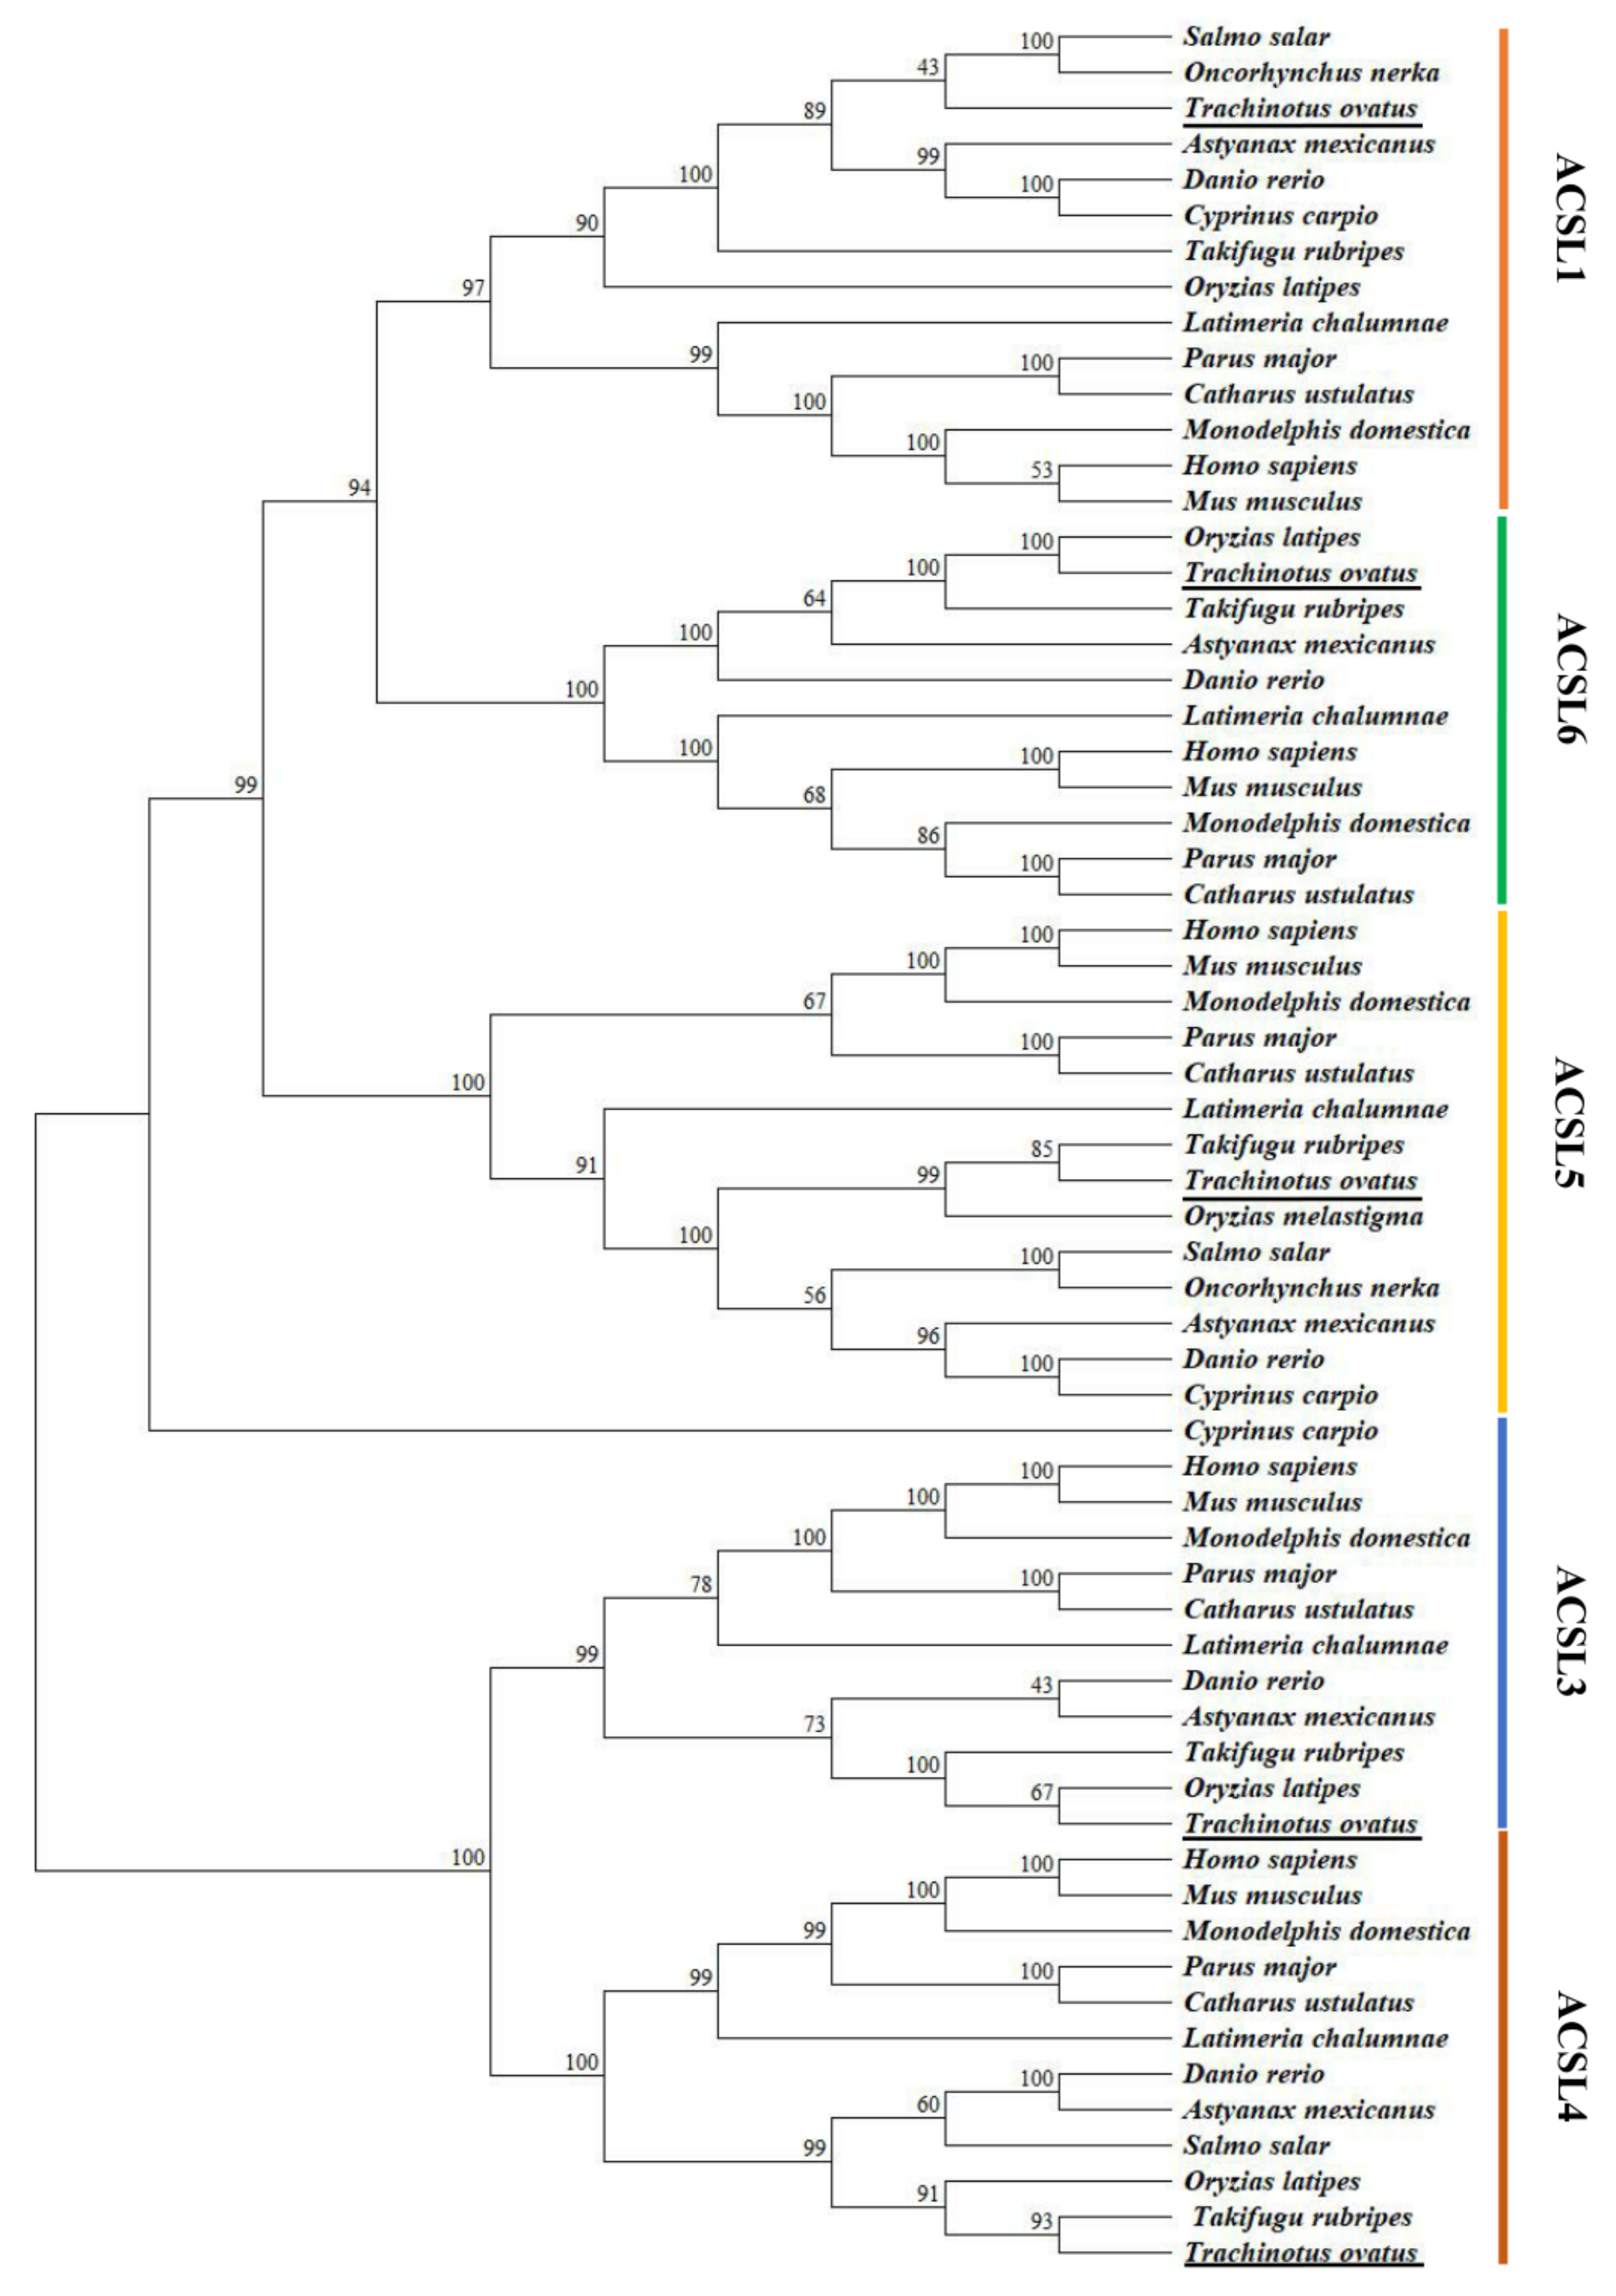 IJMS | Free Full-Text | Molecular Characterization, Tissue Distribution  Profile, and Nutritional Regulation of acsl Gene Family in Golden Pompano  (Trachinotus ovatus)